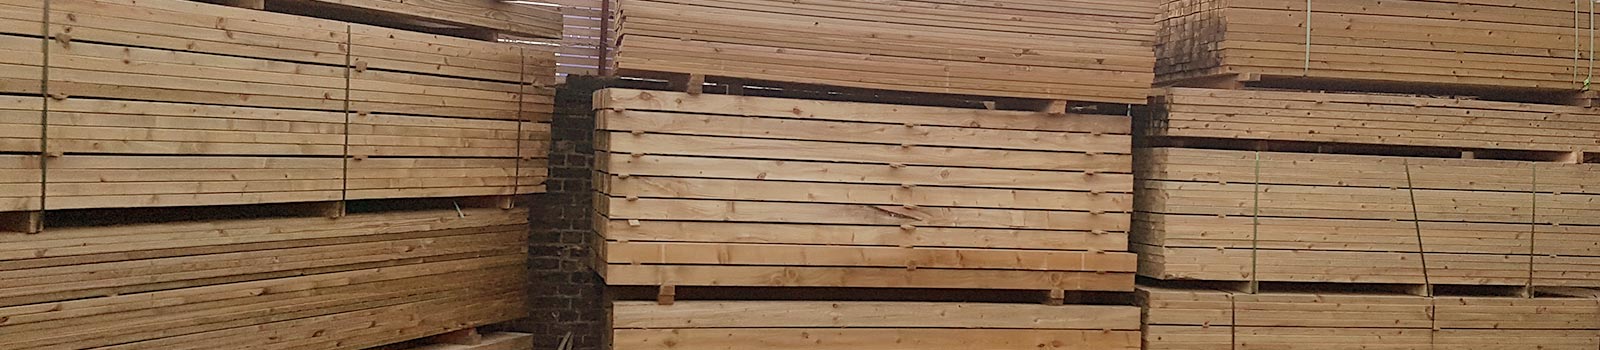 softwood timber carcassing